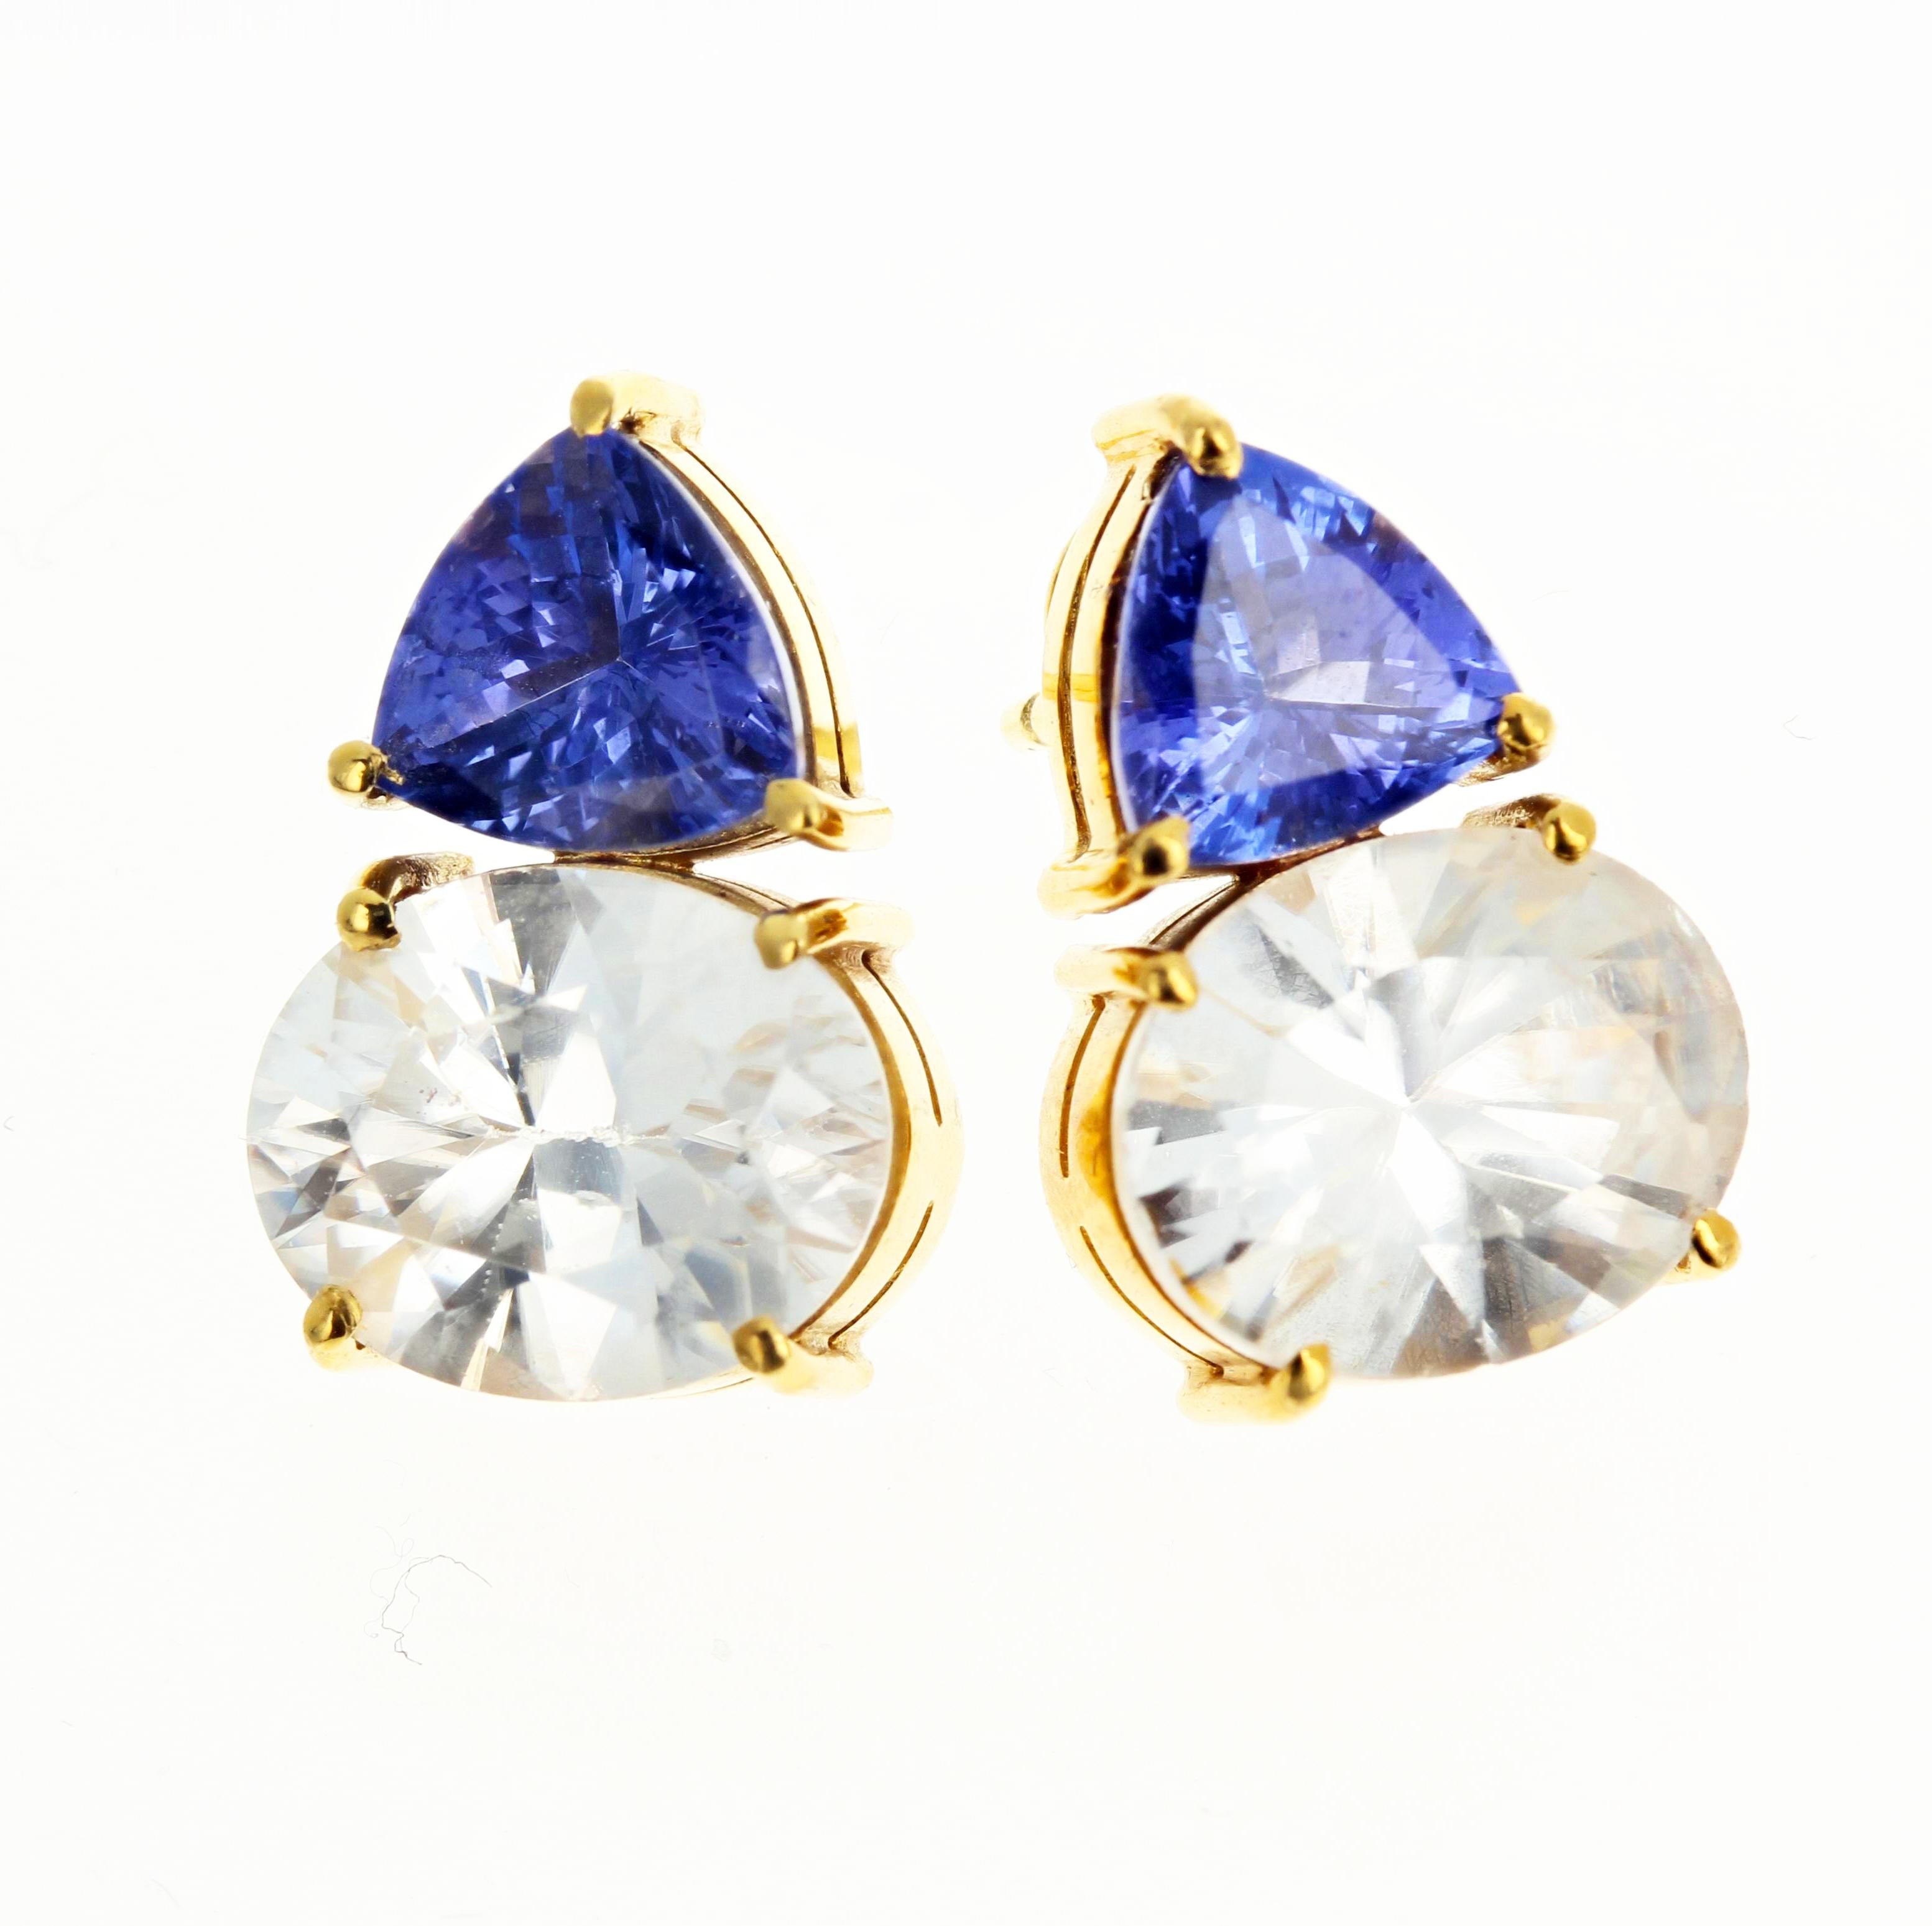 AJD Glittering Tanzanite & Natural White Zircon 18 KT Gold Stud Earrings In New Condition For Sale In Raleigh, NC